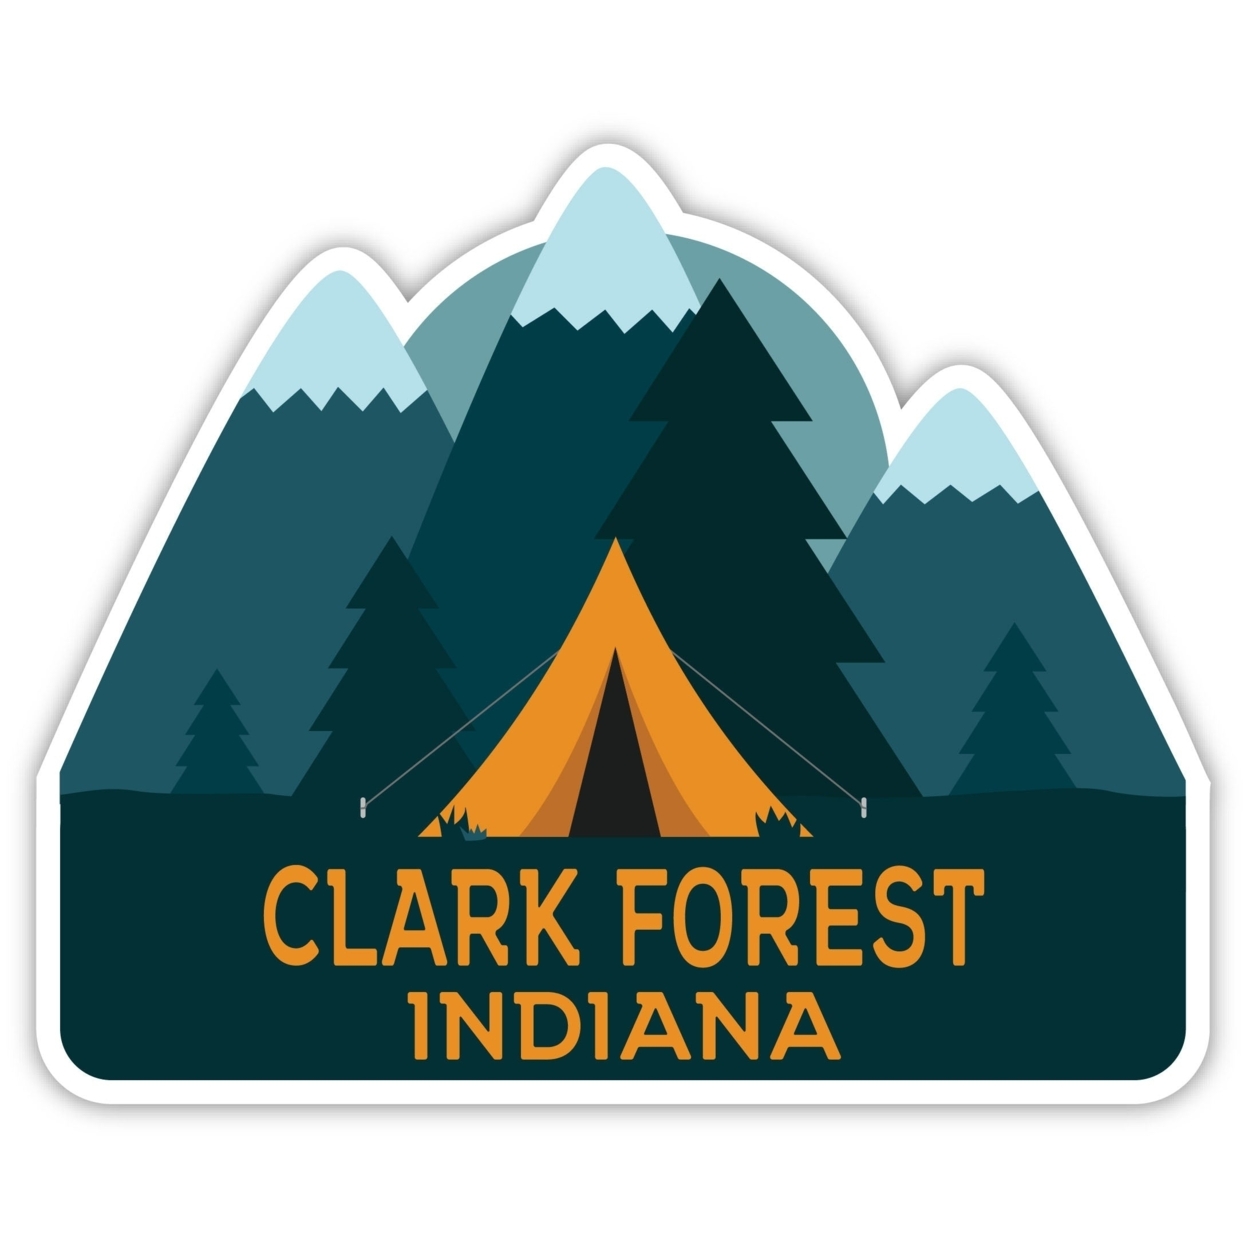 Clark Forest Indiana Souvenir Decorative Stickers (Choose Theme And Size) - 4-Pack, 8-Inch, Tent